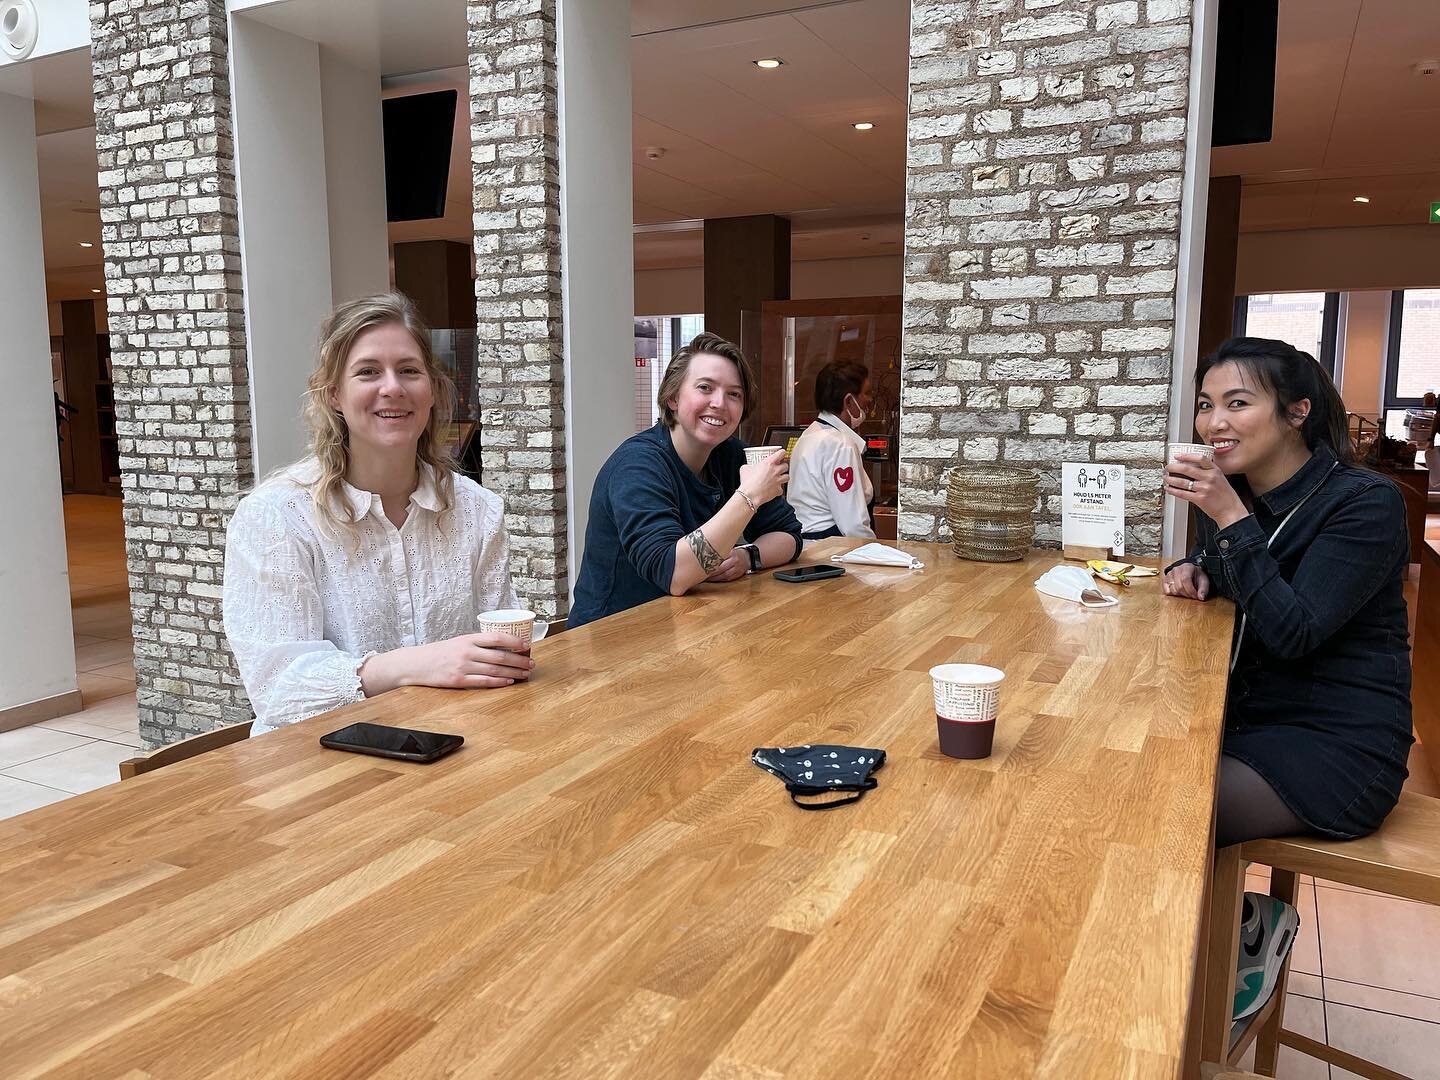 Our newest @scils_eu recruit @andepande123 initiated into the ways of the Ciliarium aka mandatory coffee break 😉☕️. Welcome to the group Anne! With @amoramor001 @whitingpc